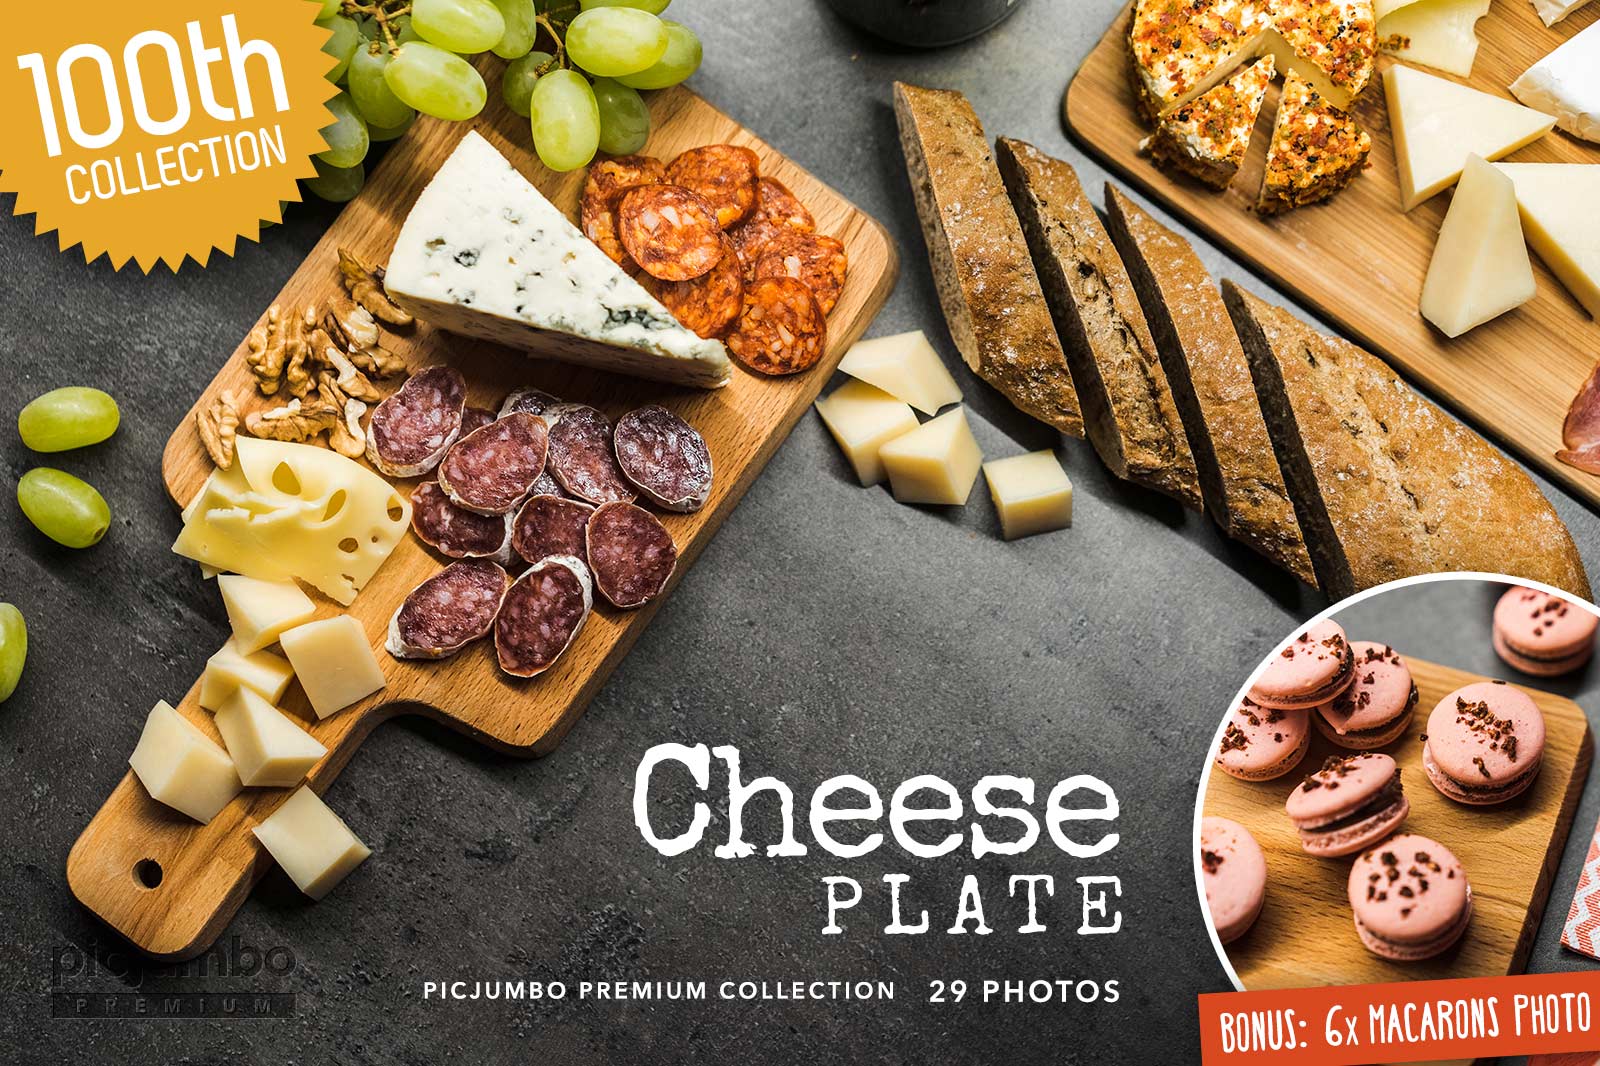 Download hi-res stock photos from our Cheese Plate PREMIUM Collection!